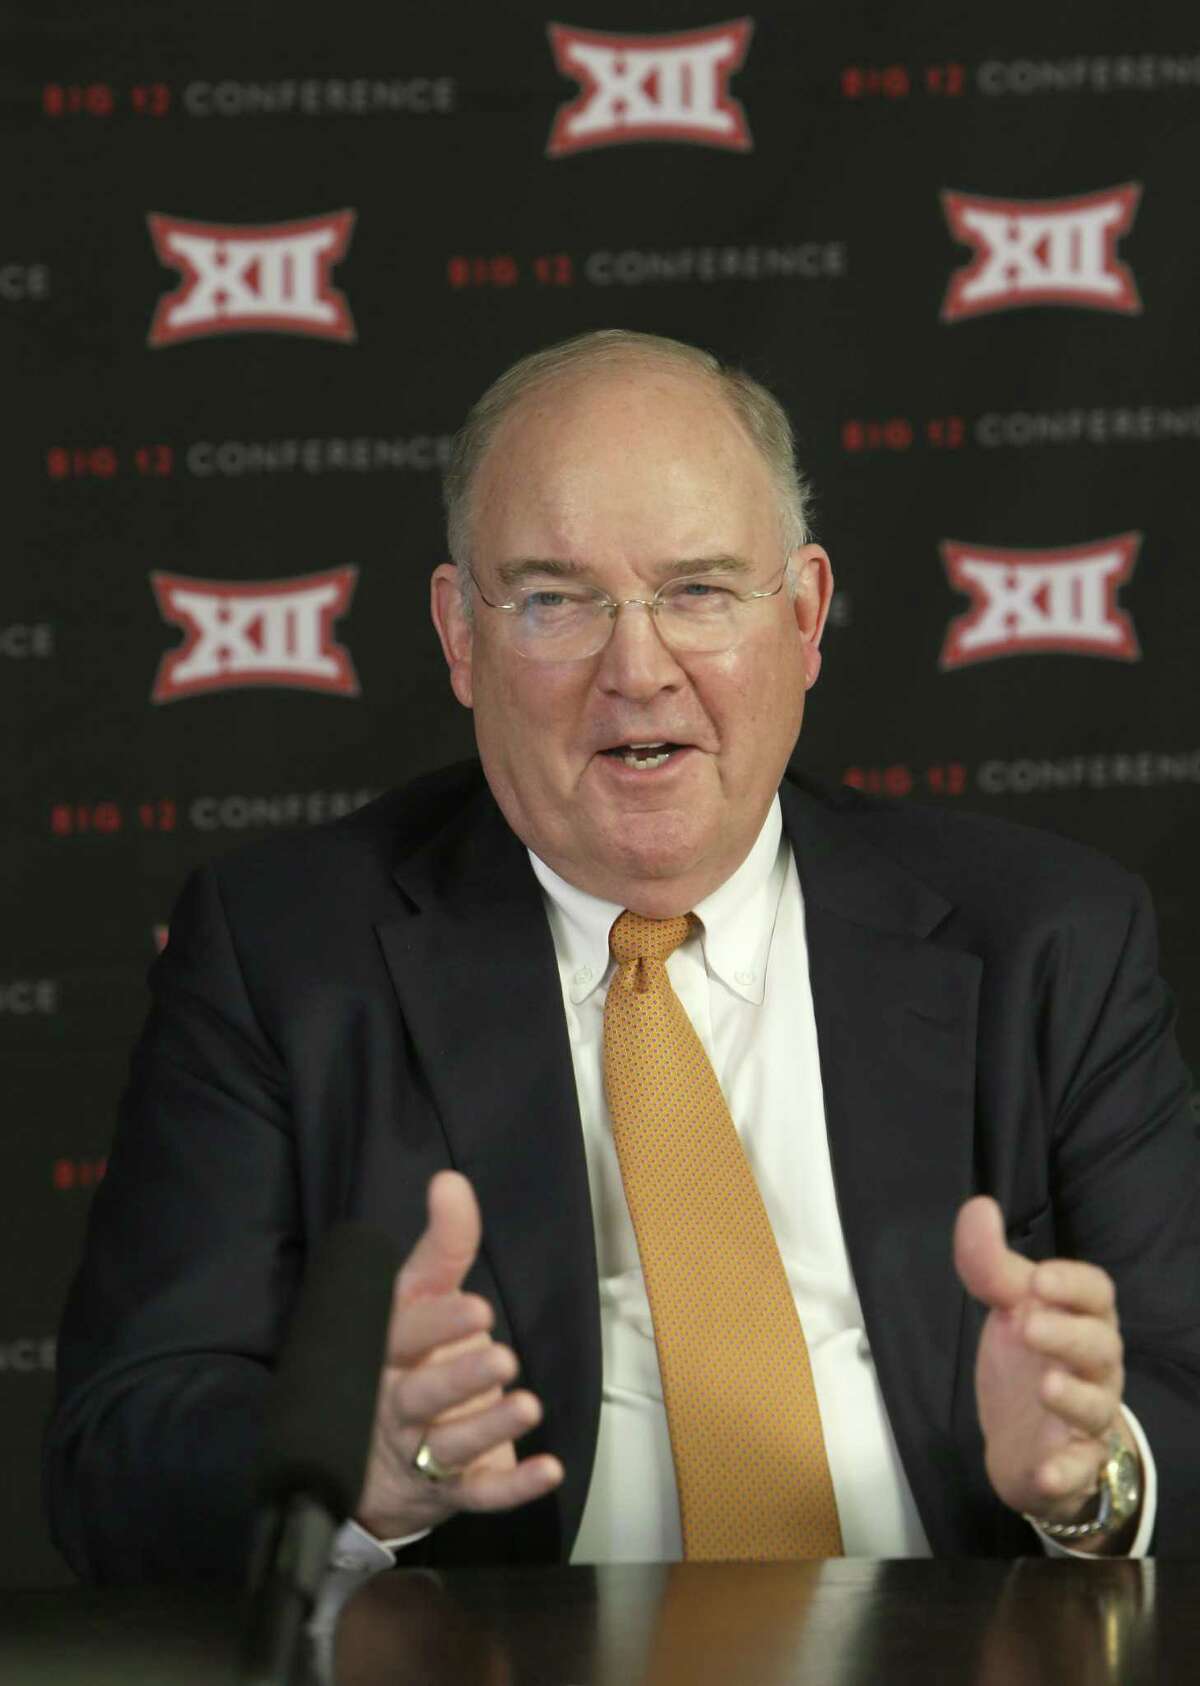 Texas athletic director Mike Perrin speaks to reporters after the Big 12 Conference meetings on Feb. 4, 2016, in Irving.